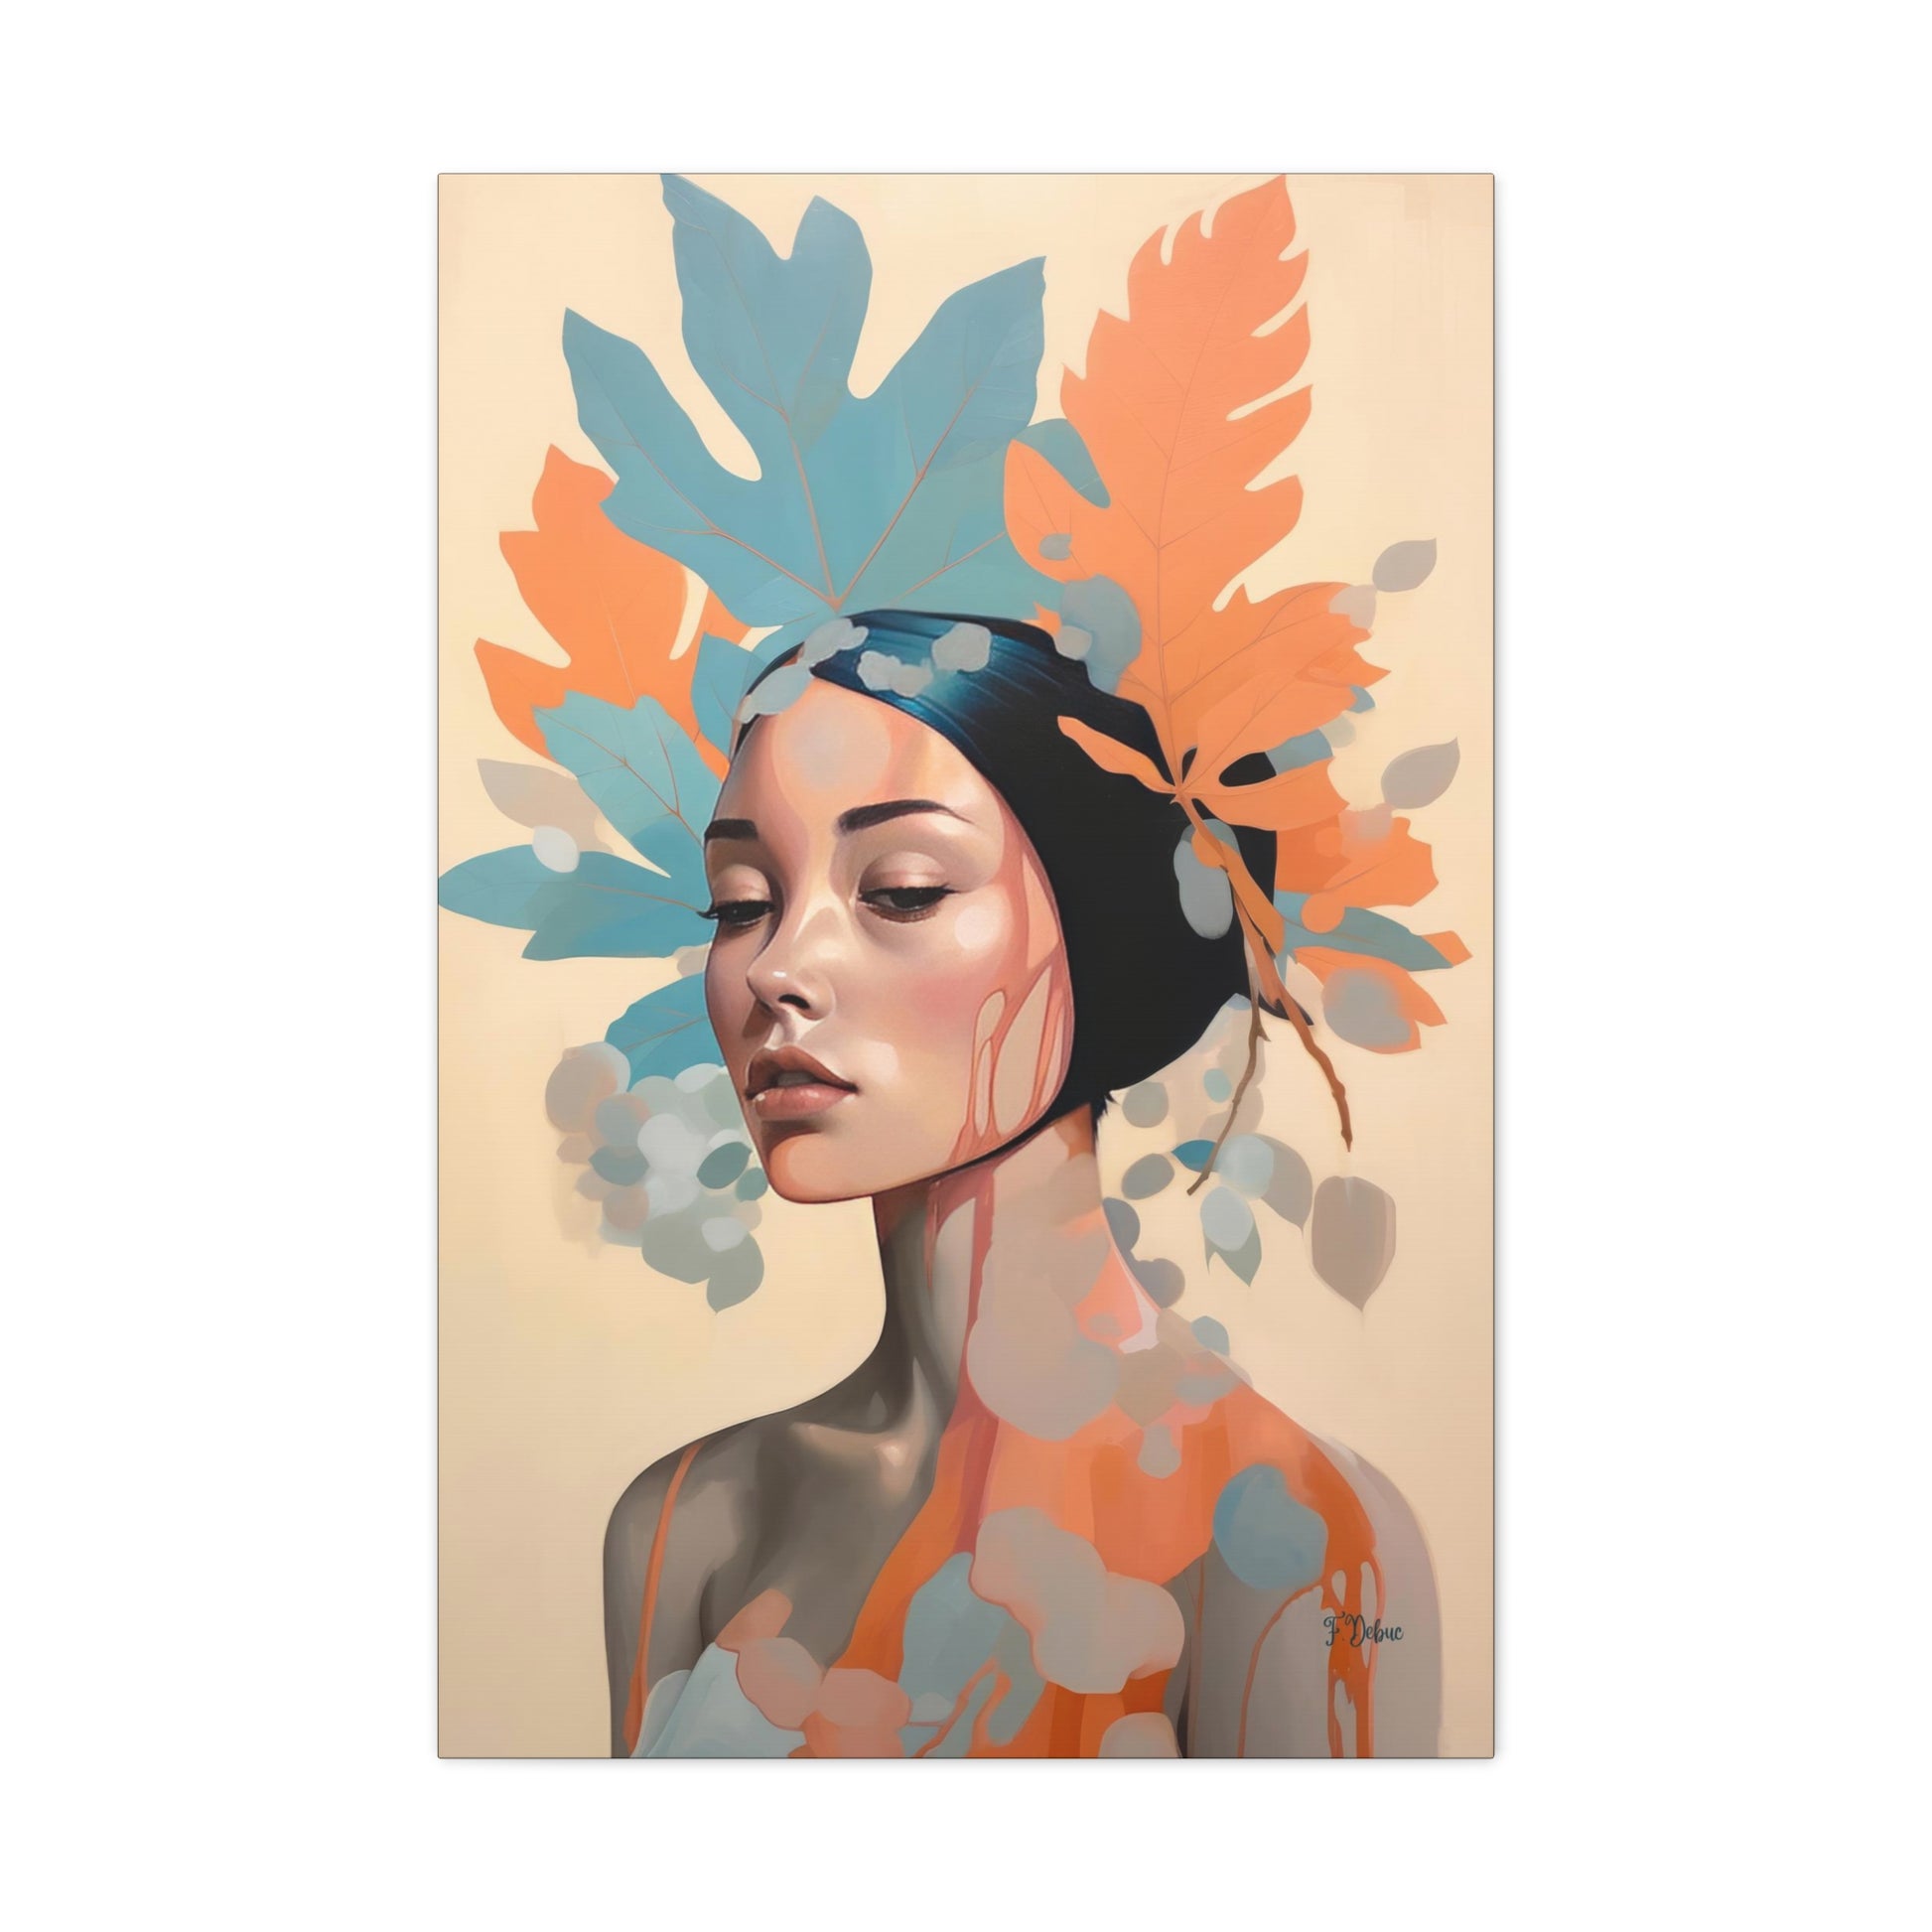 Our canvas wall art showcases a woman adorned with leaves. Elevate your decor with a touch of grace and minimalism.